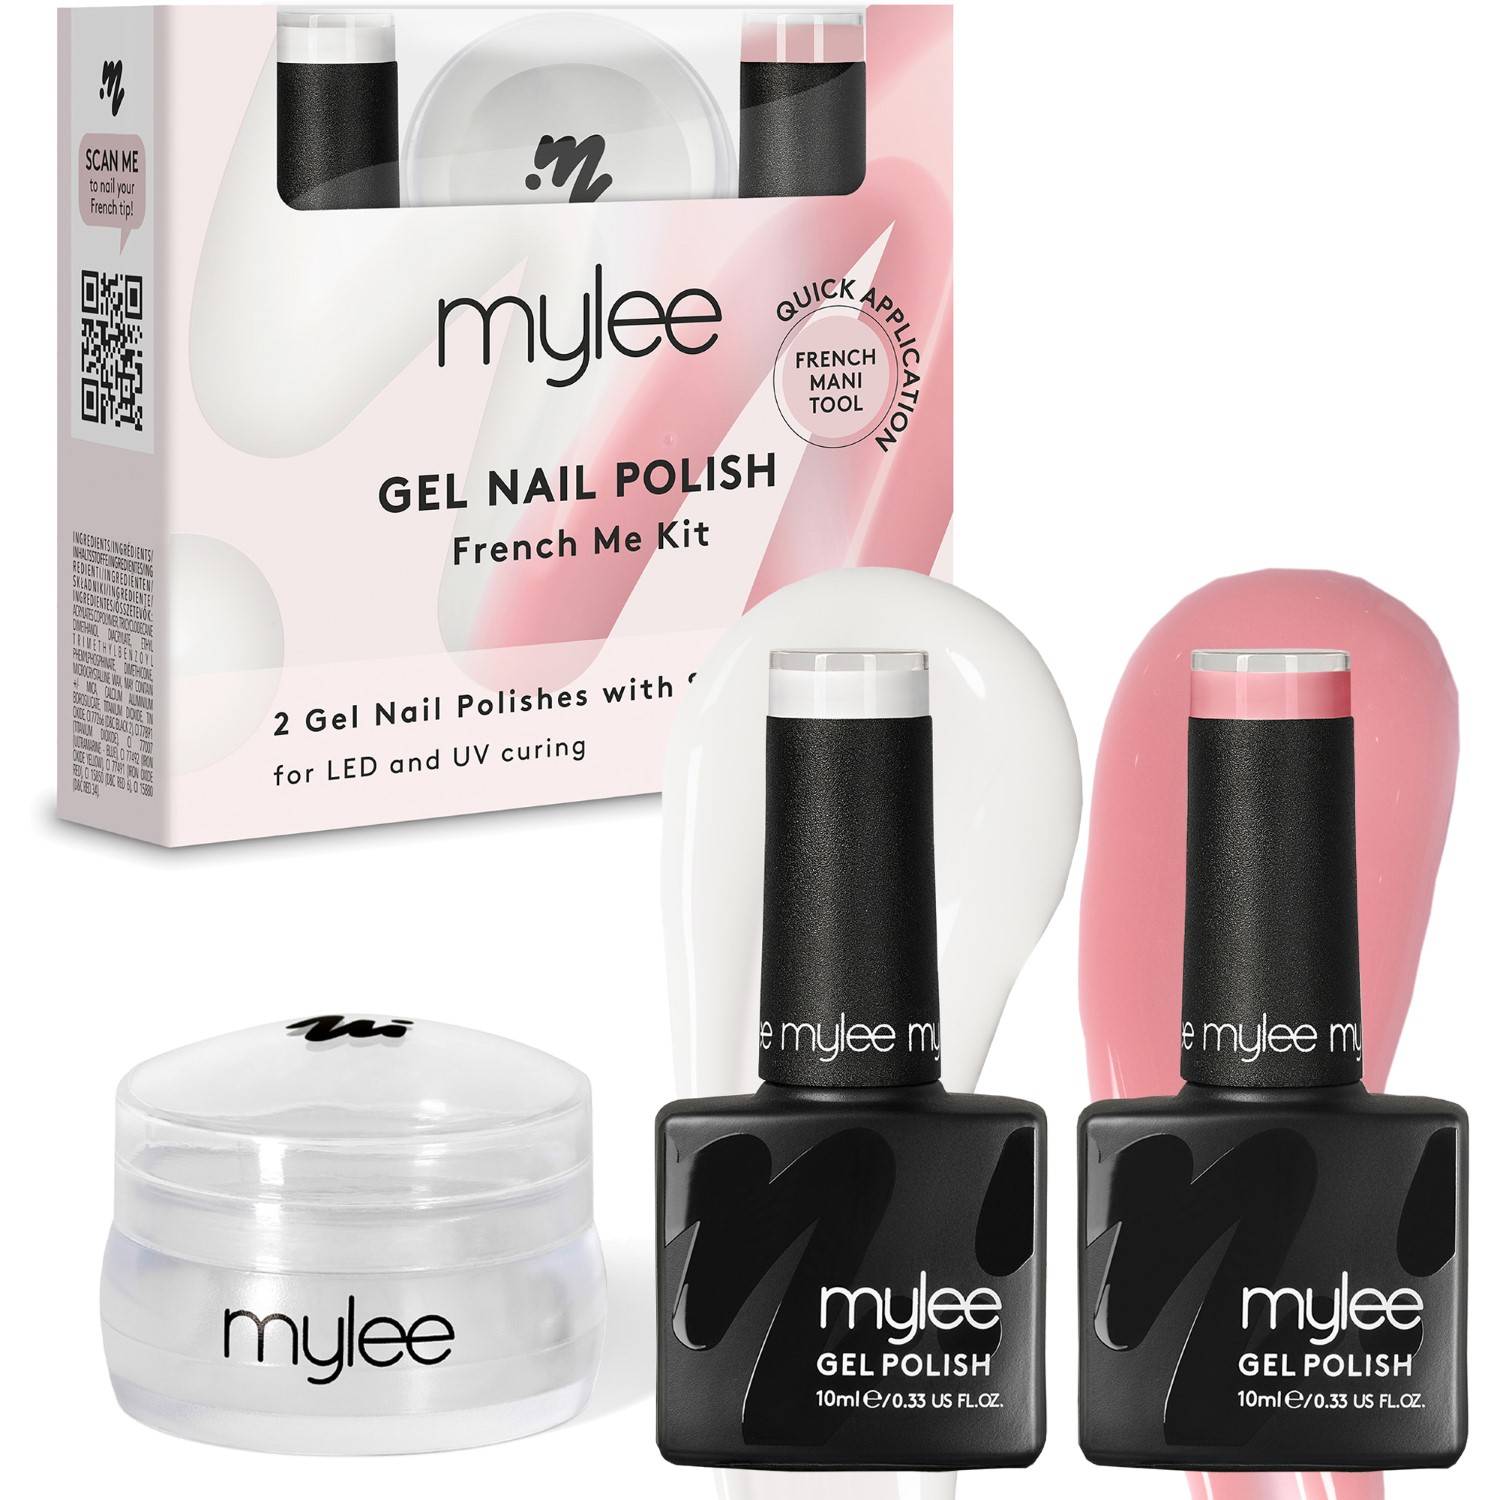 Mylee French Me Kit with Stamper - Salon Quality French Manicure at Home; Includes White & Nude Gel Nail Polish + Clear Silicone Stamping Tool